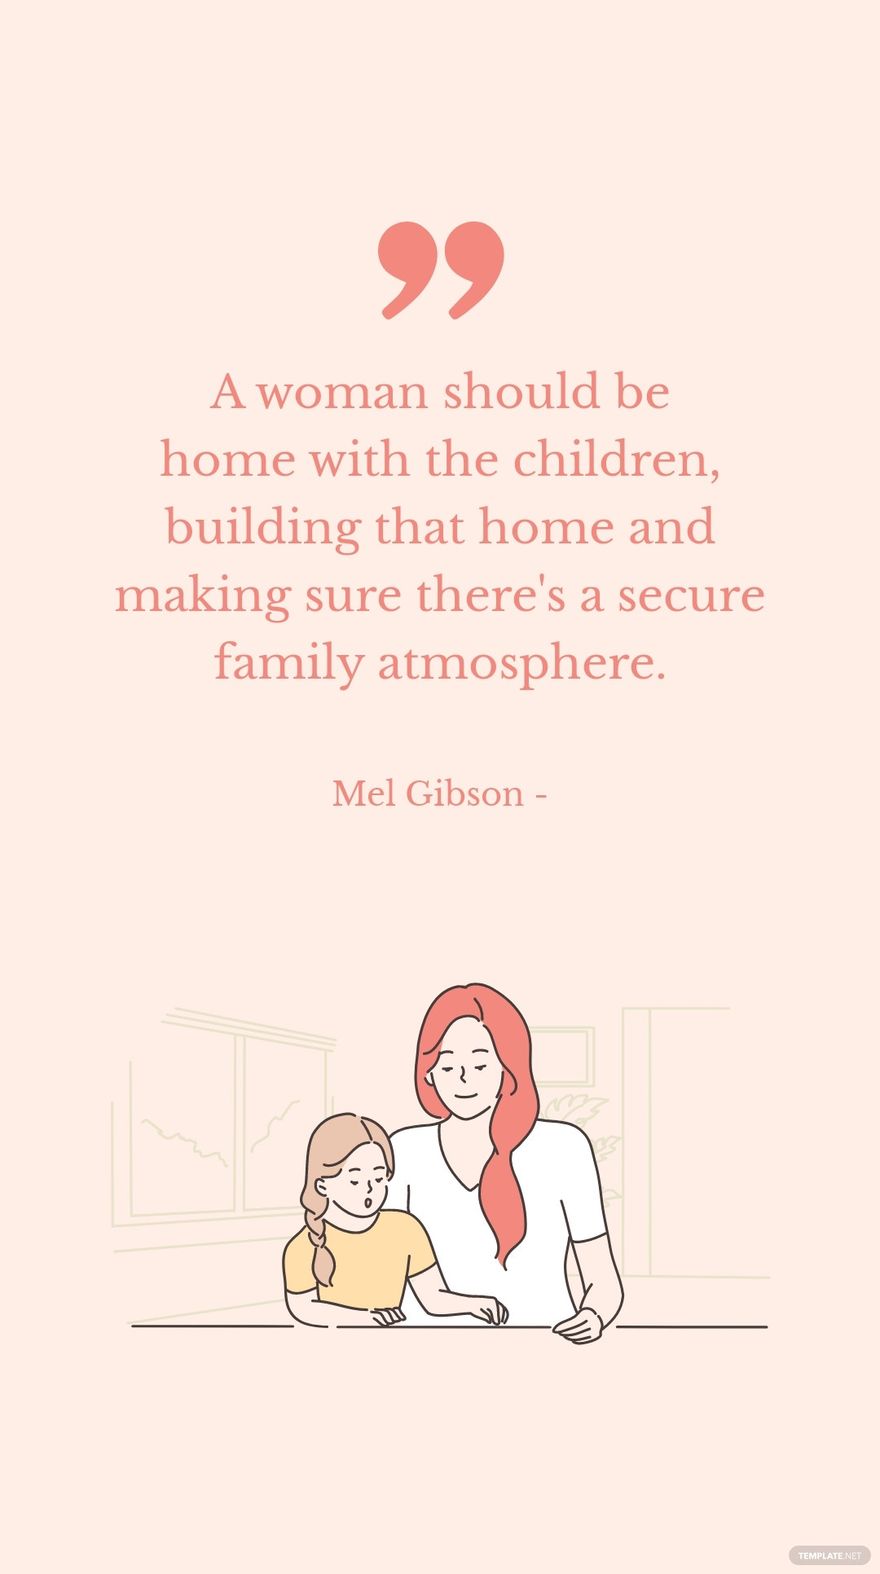 Mel Gibson - A woman should be home with the children, building that home and making sure there's a secure family atmosphere. in JPG